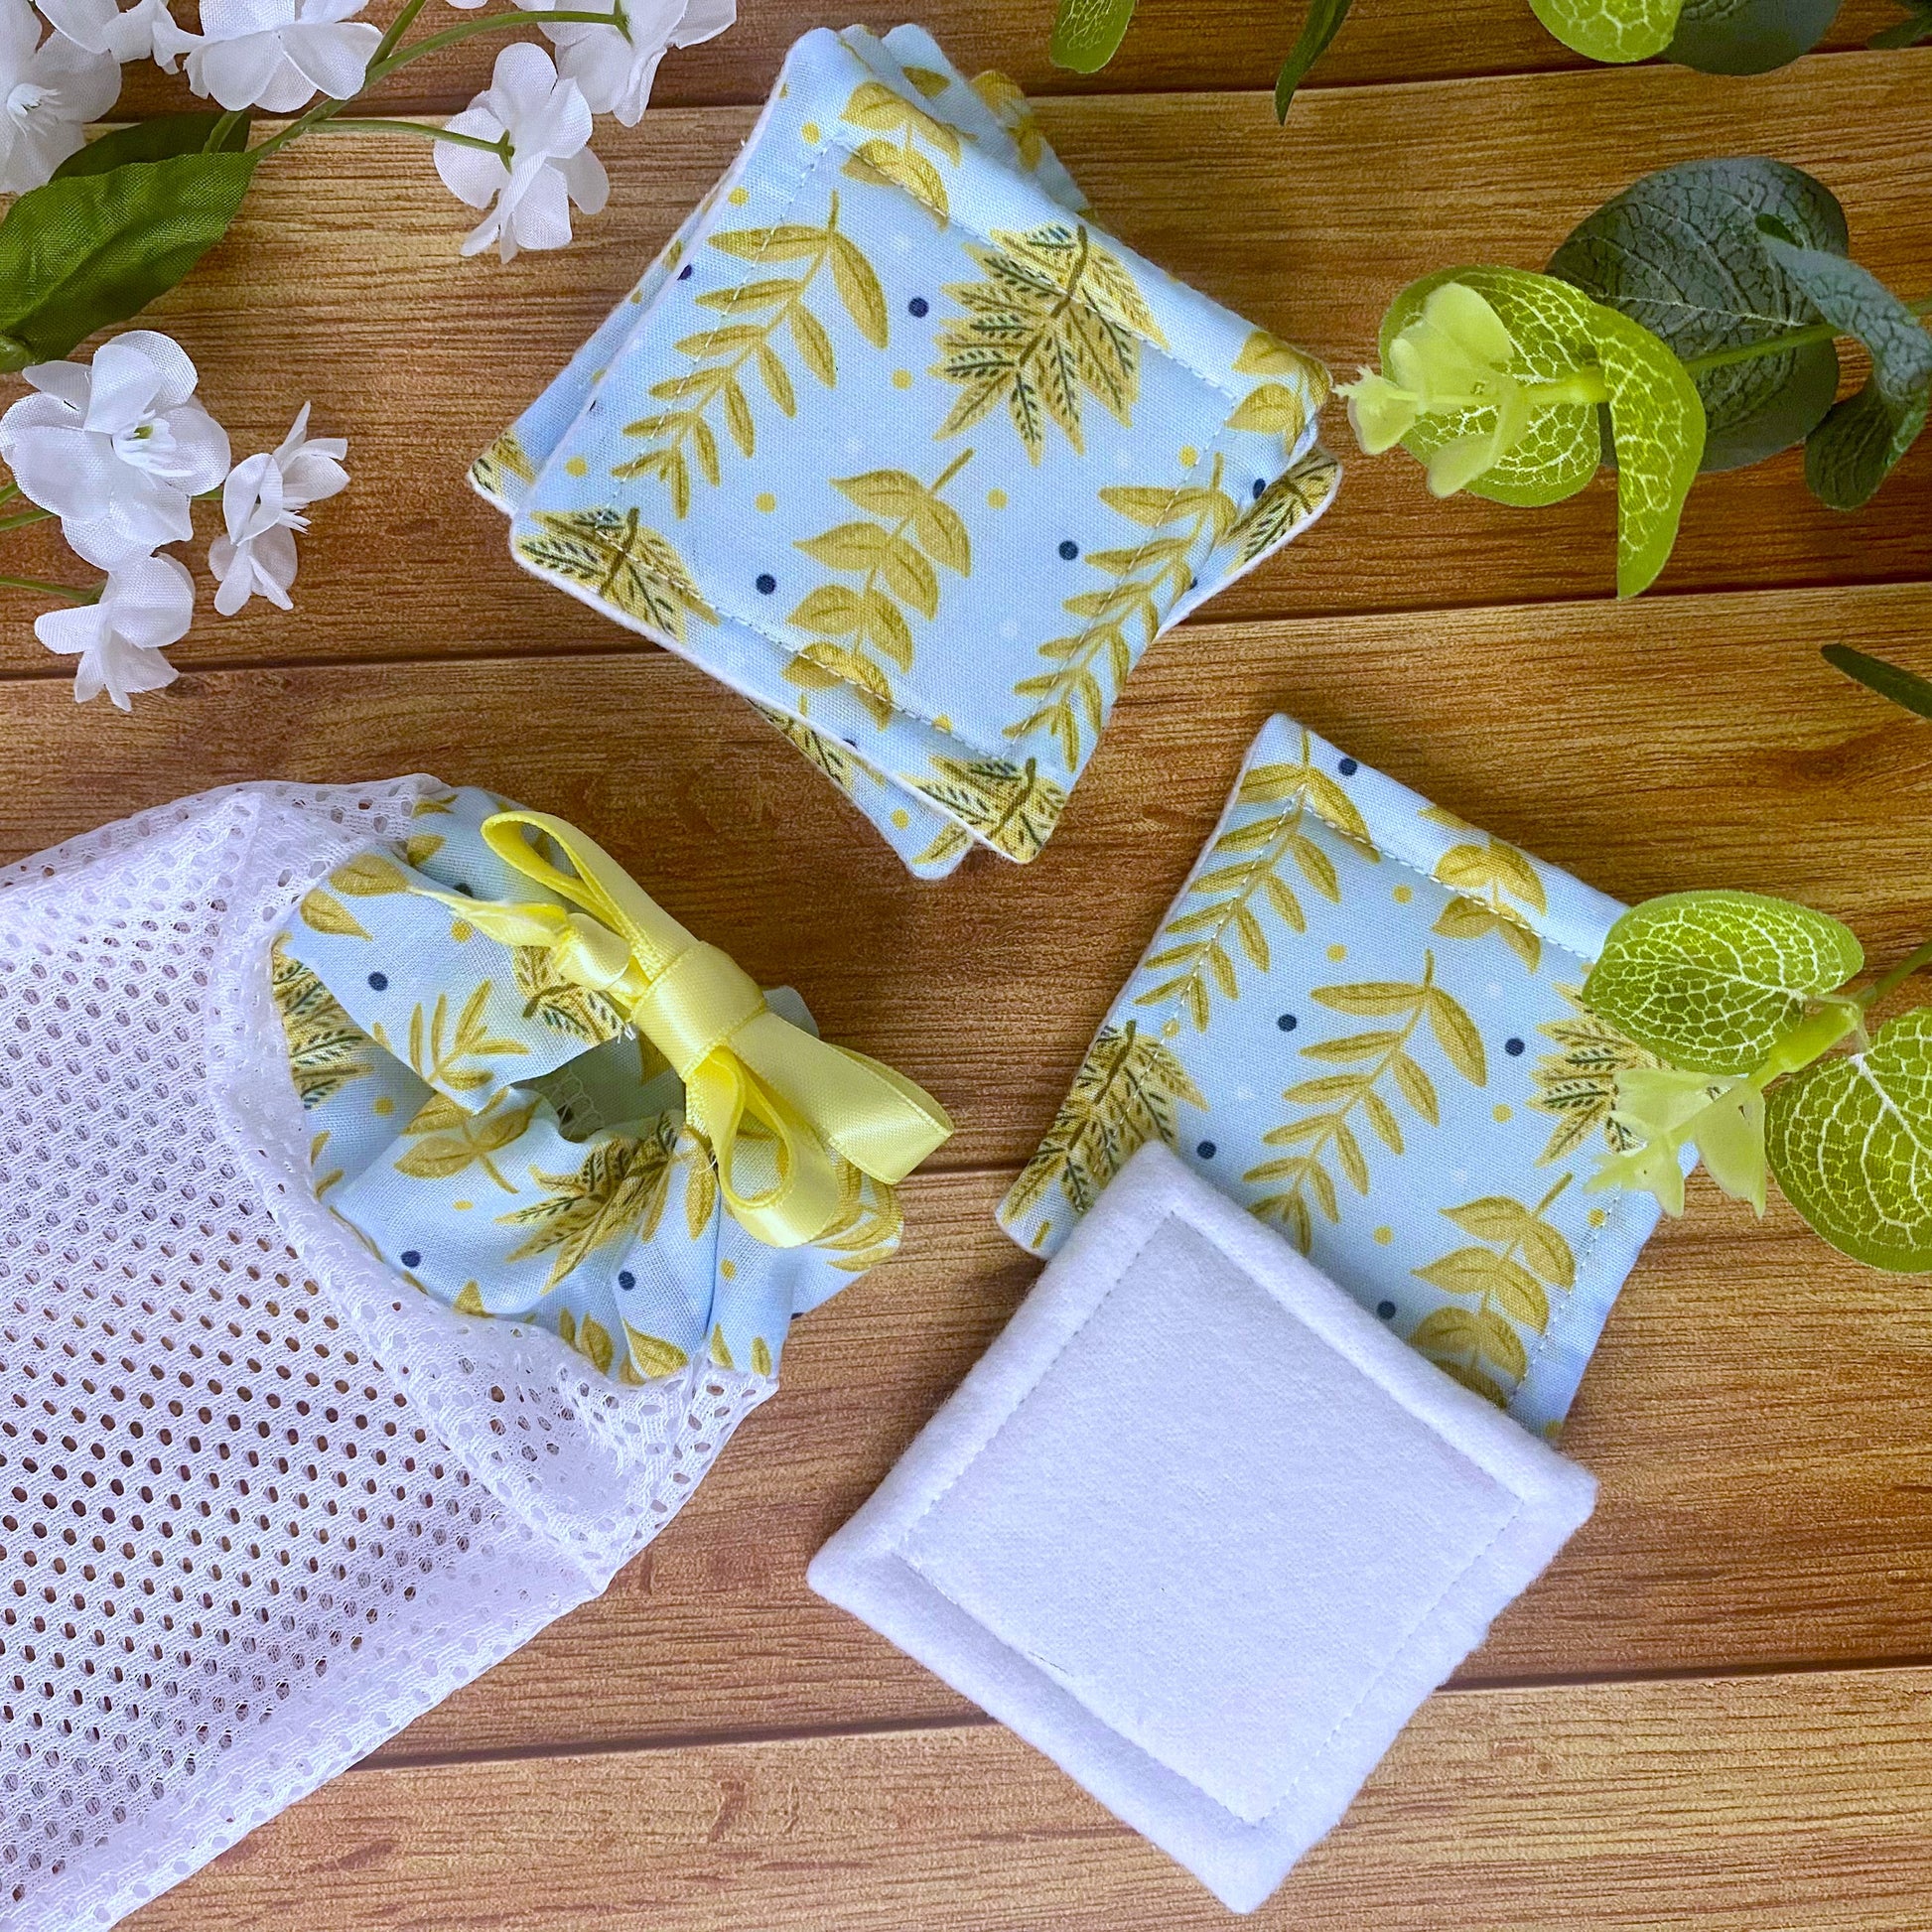 yellow foliage patterned skincare pads and washbag on wooden surface